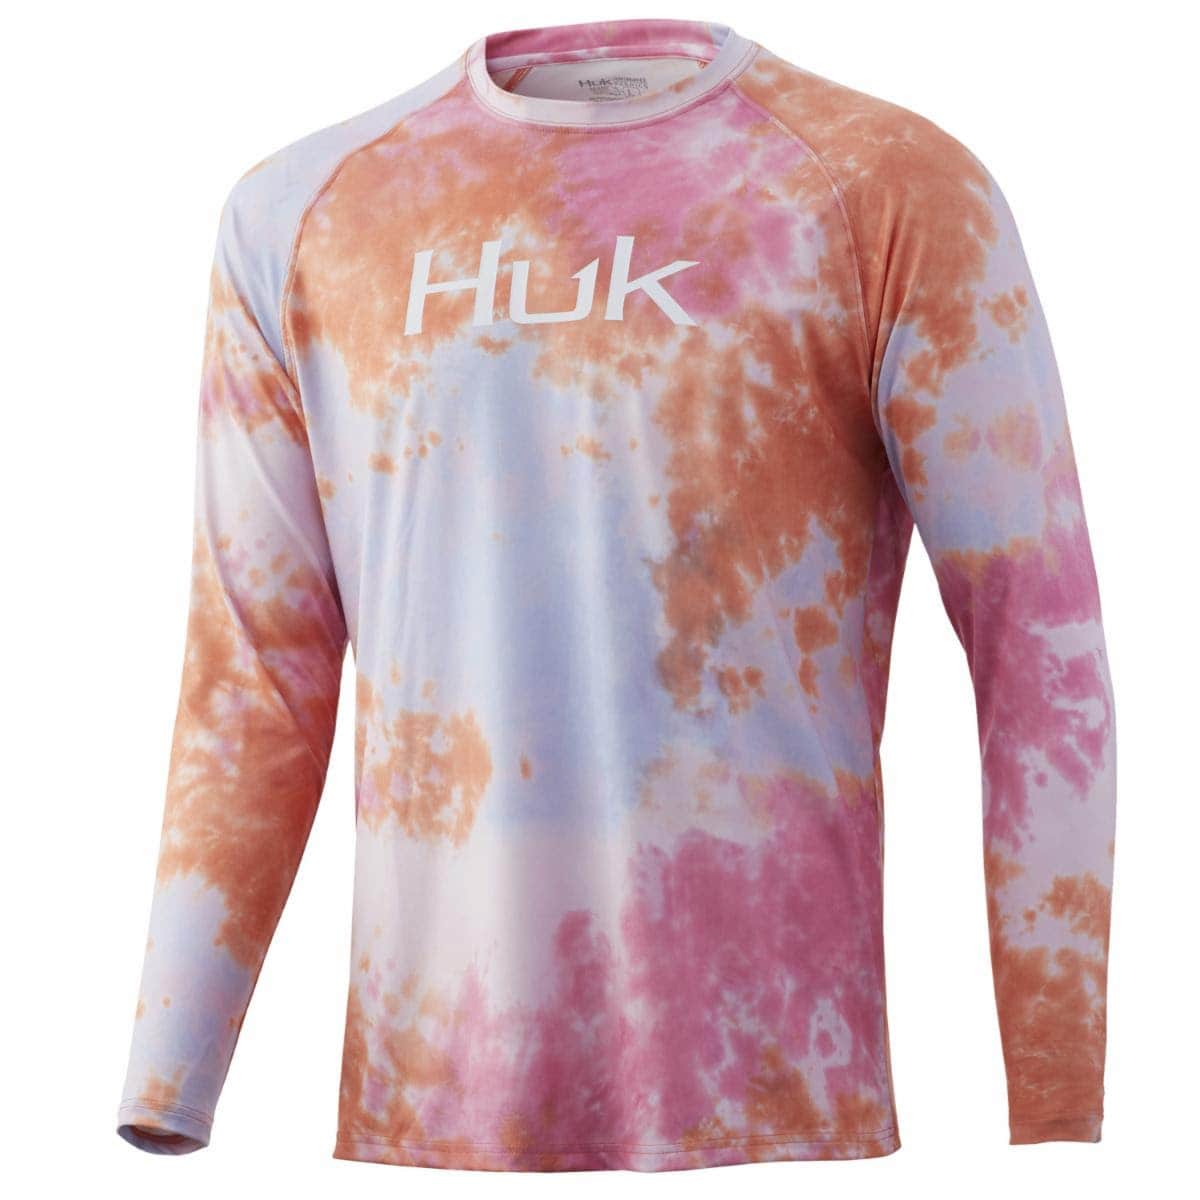 Huk's Tie-Dye Collection Delivers Serious Performance Alongside